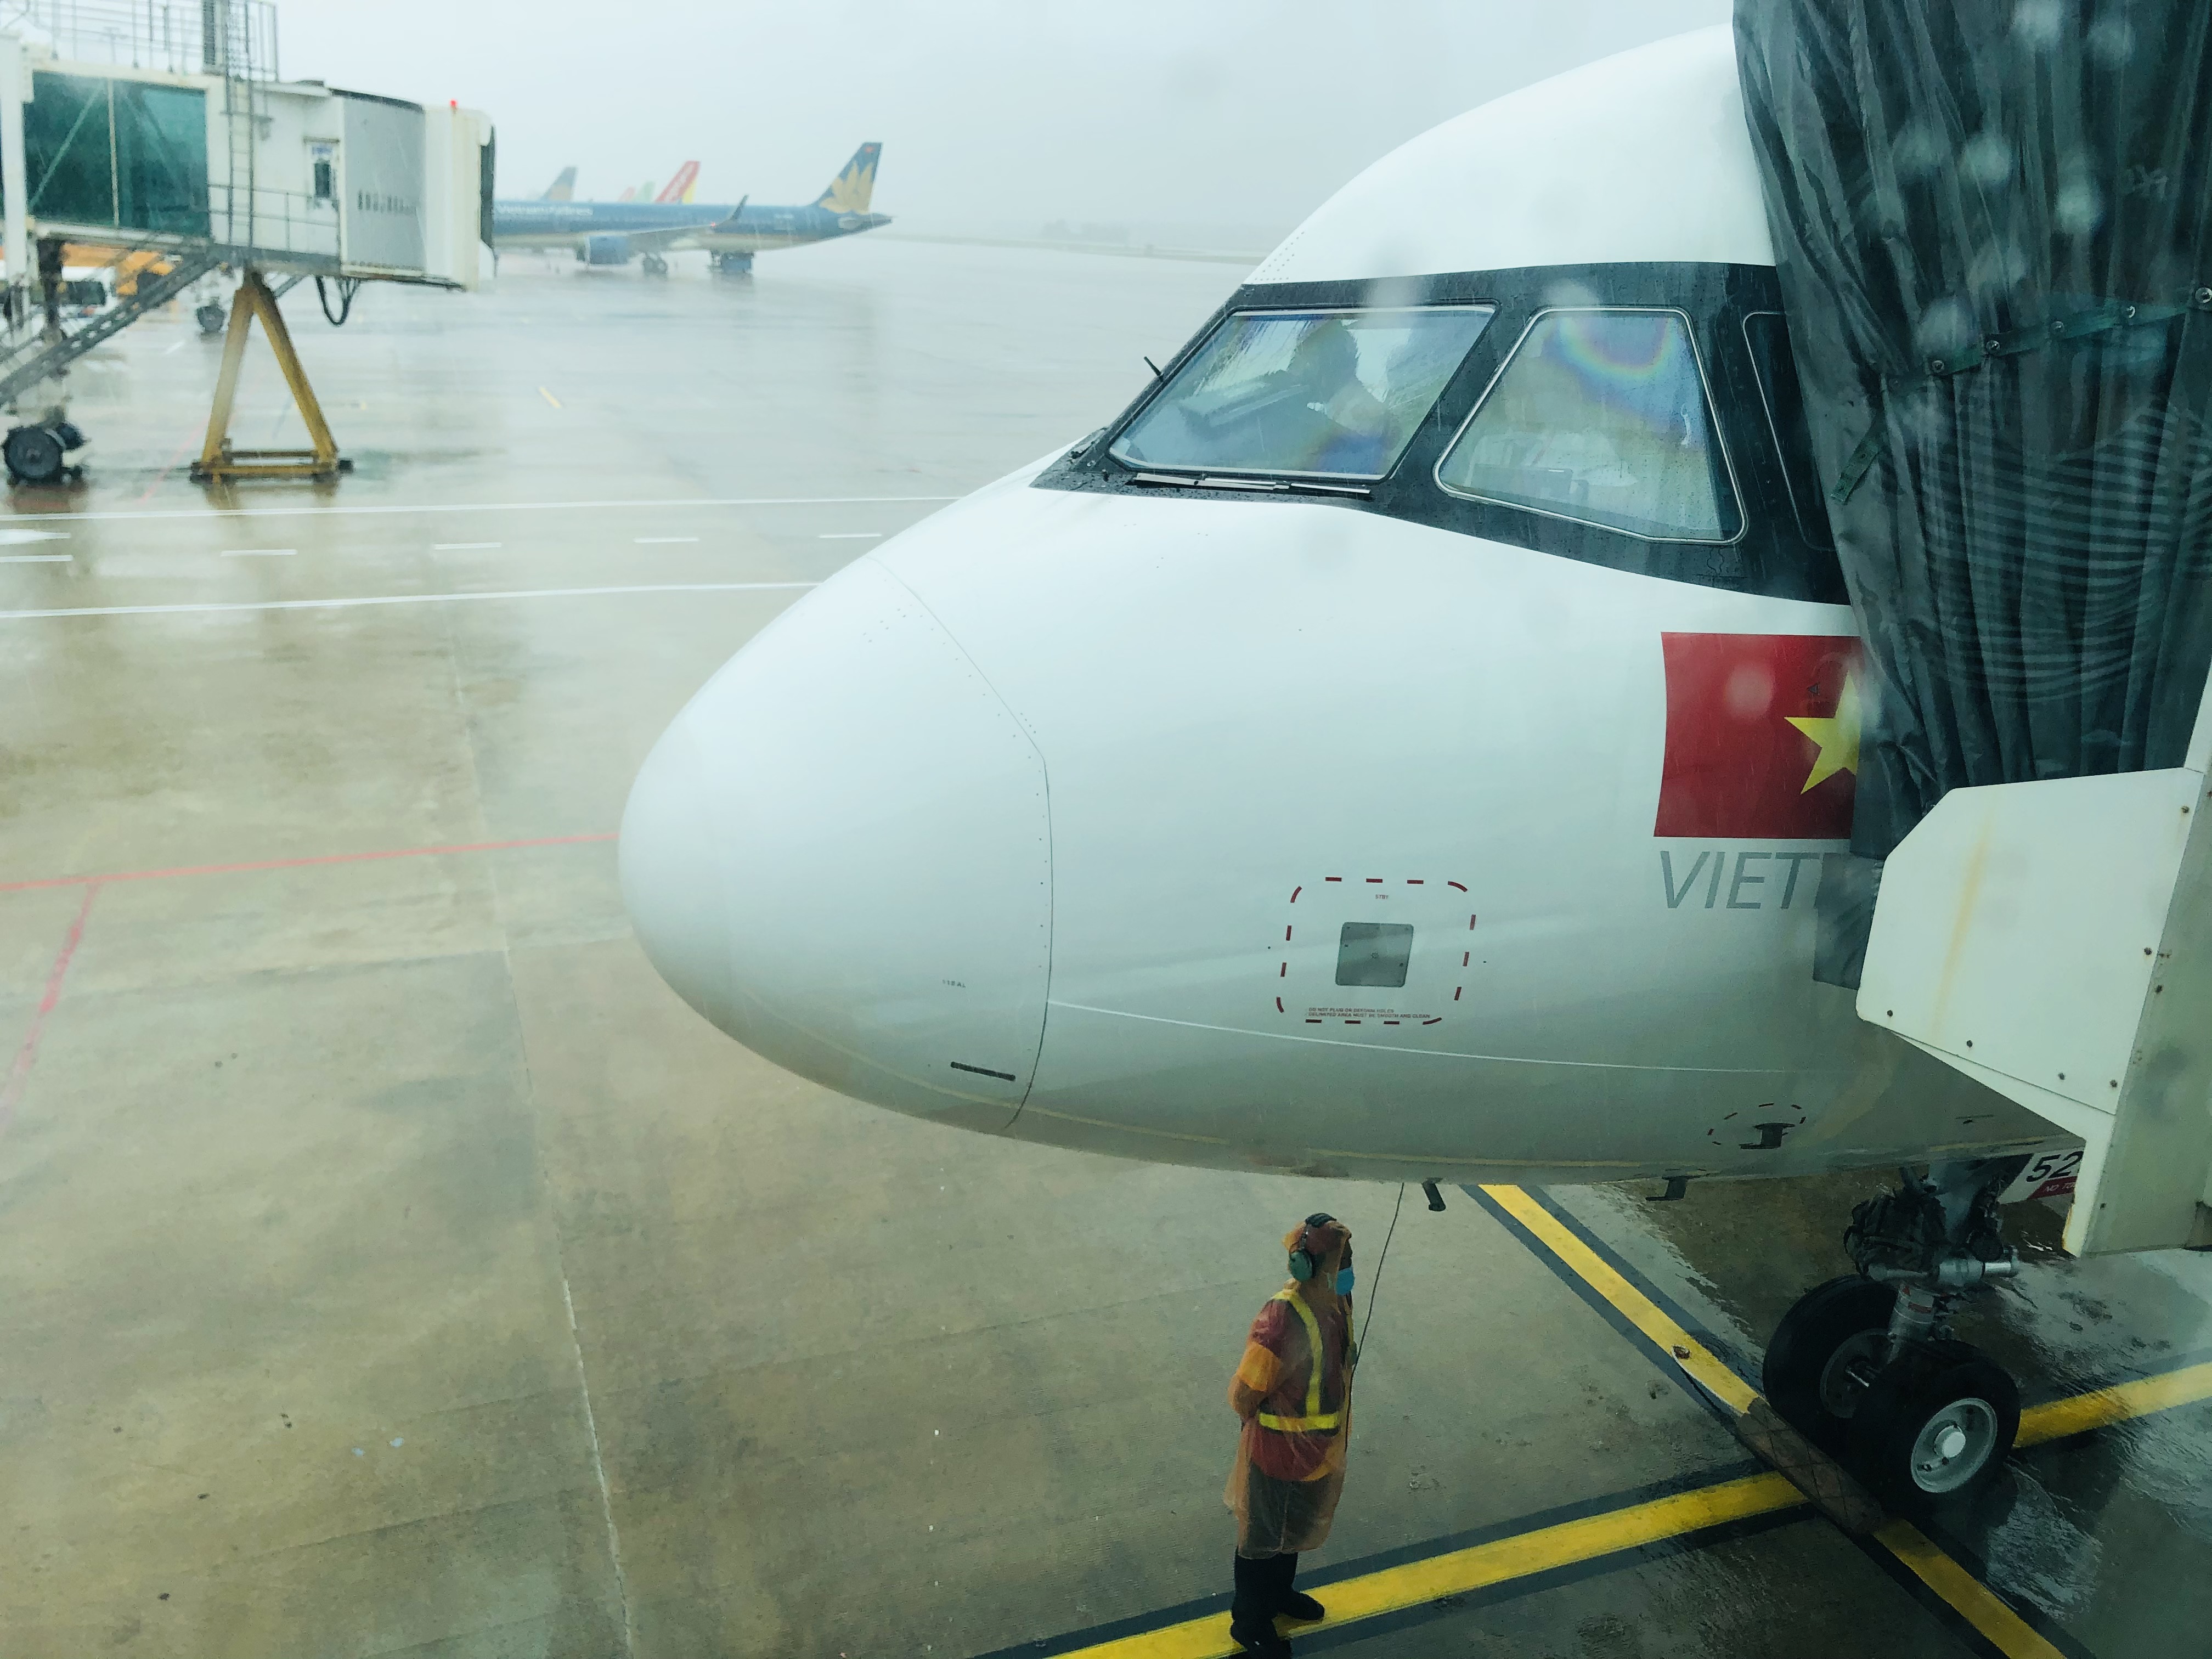 Heavy rain forces many flights into holding pattern around southern Vietnamese island